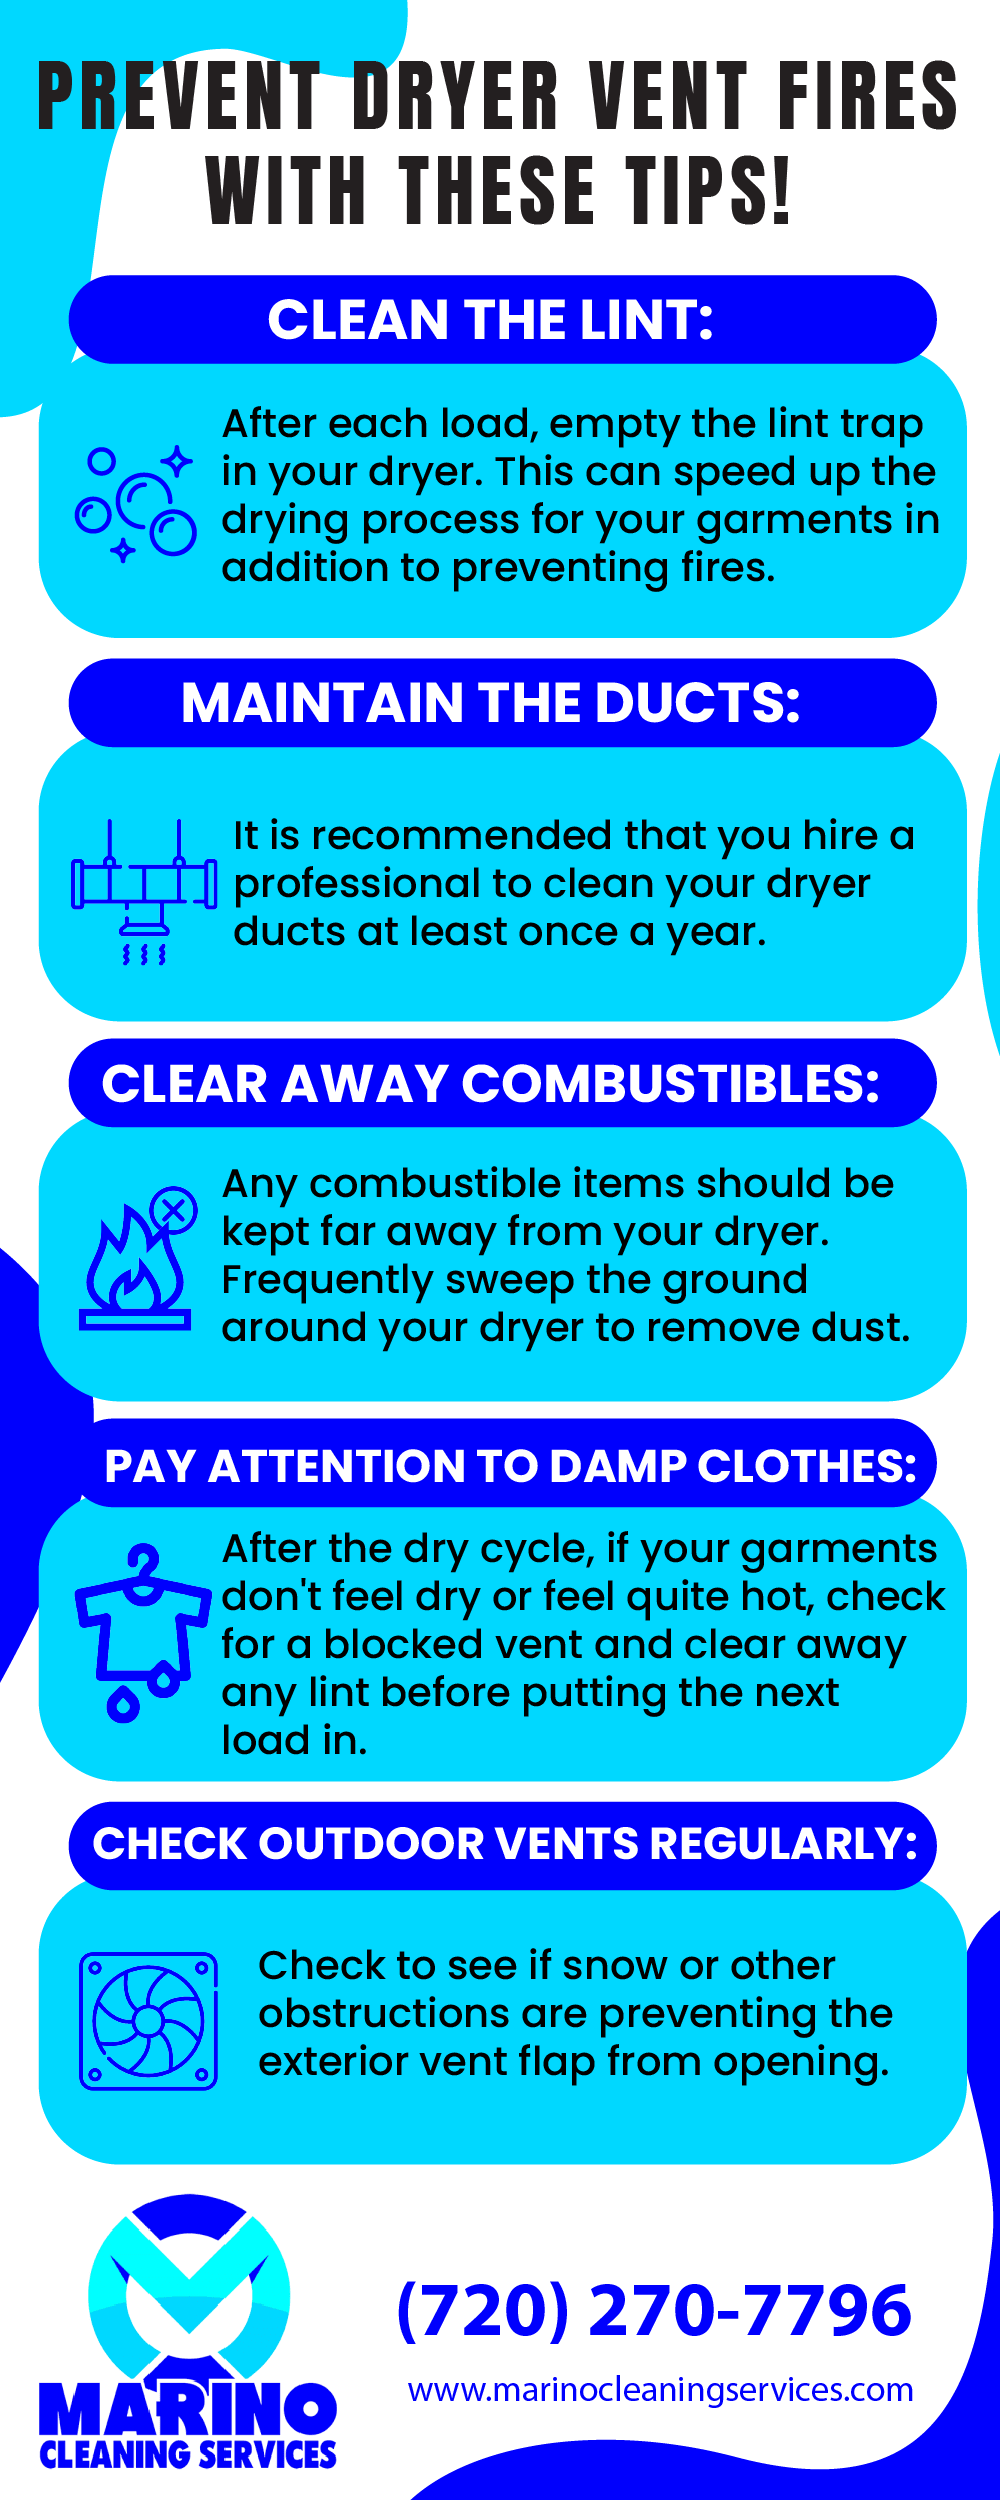 Prevent Dryer Vent Fires With These Tips!